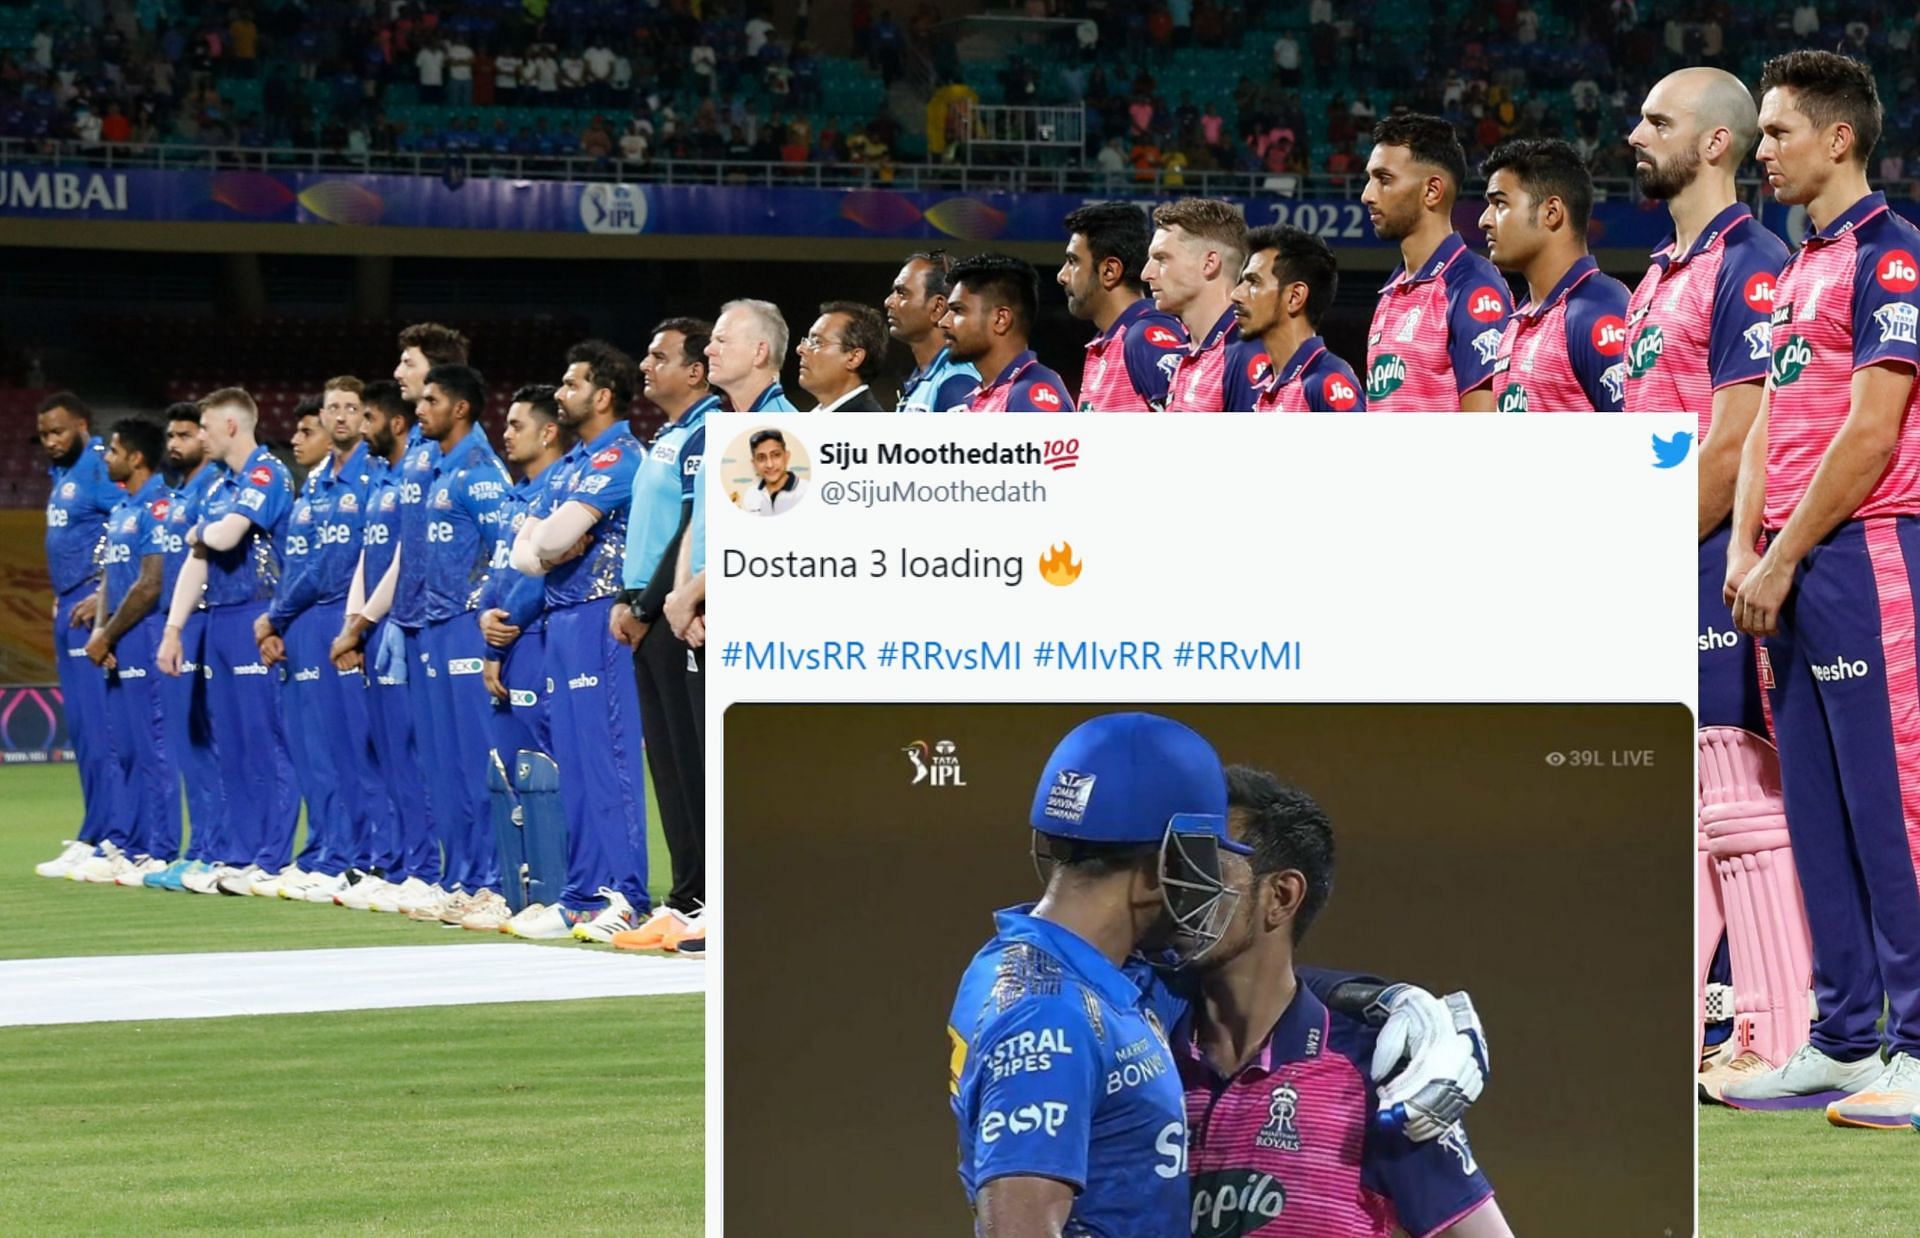 MI vs RR memes, IPL 2022: Top 10 funny memes from the latest match